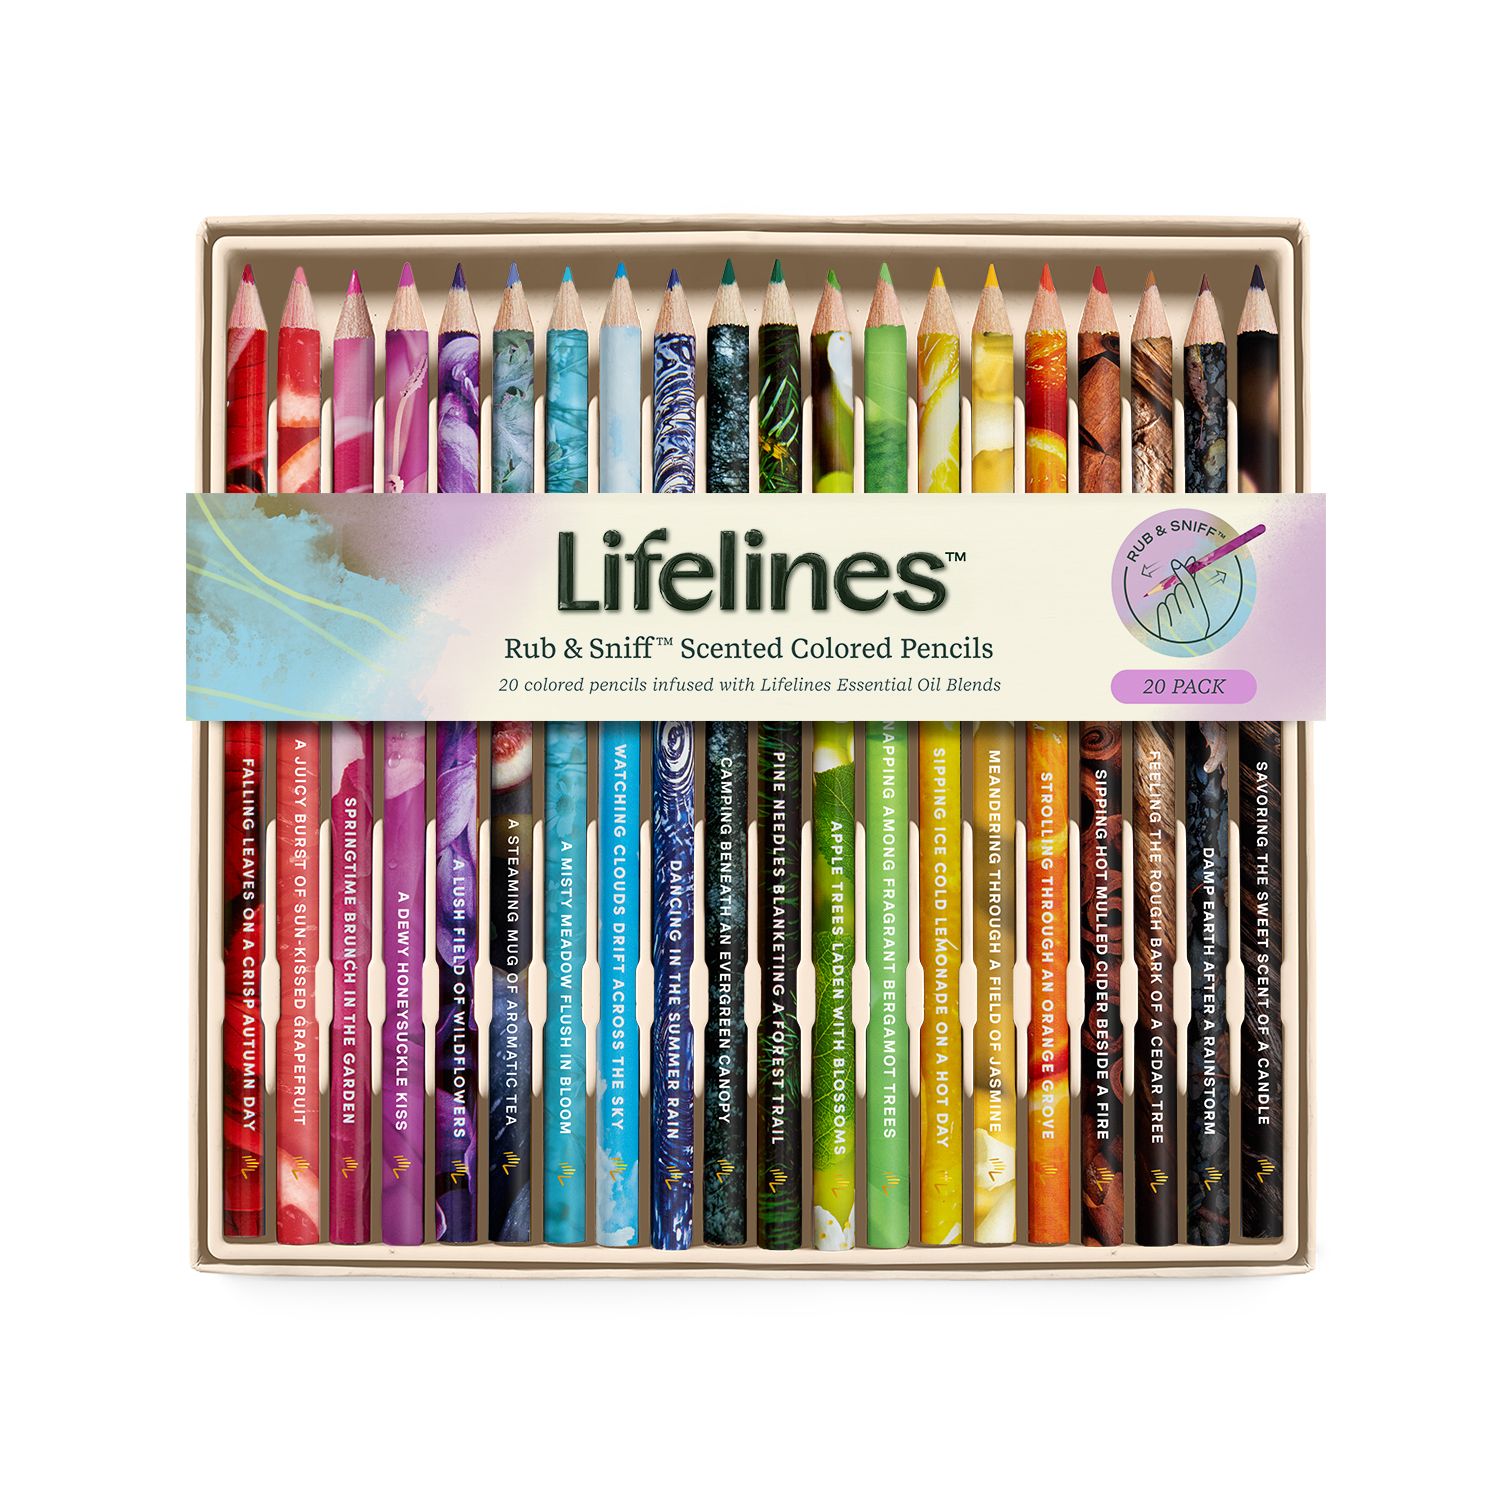 Lifelines Rub & Sniff Scented Colored Pencils - 20 Pack